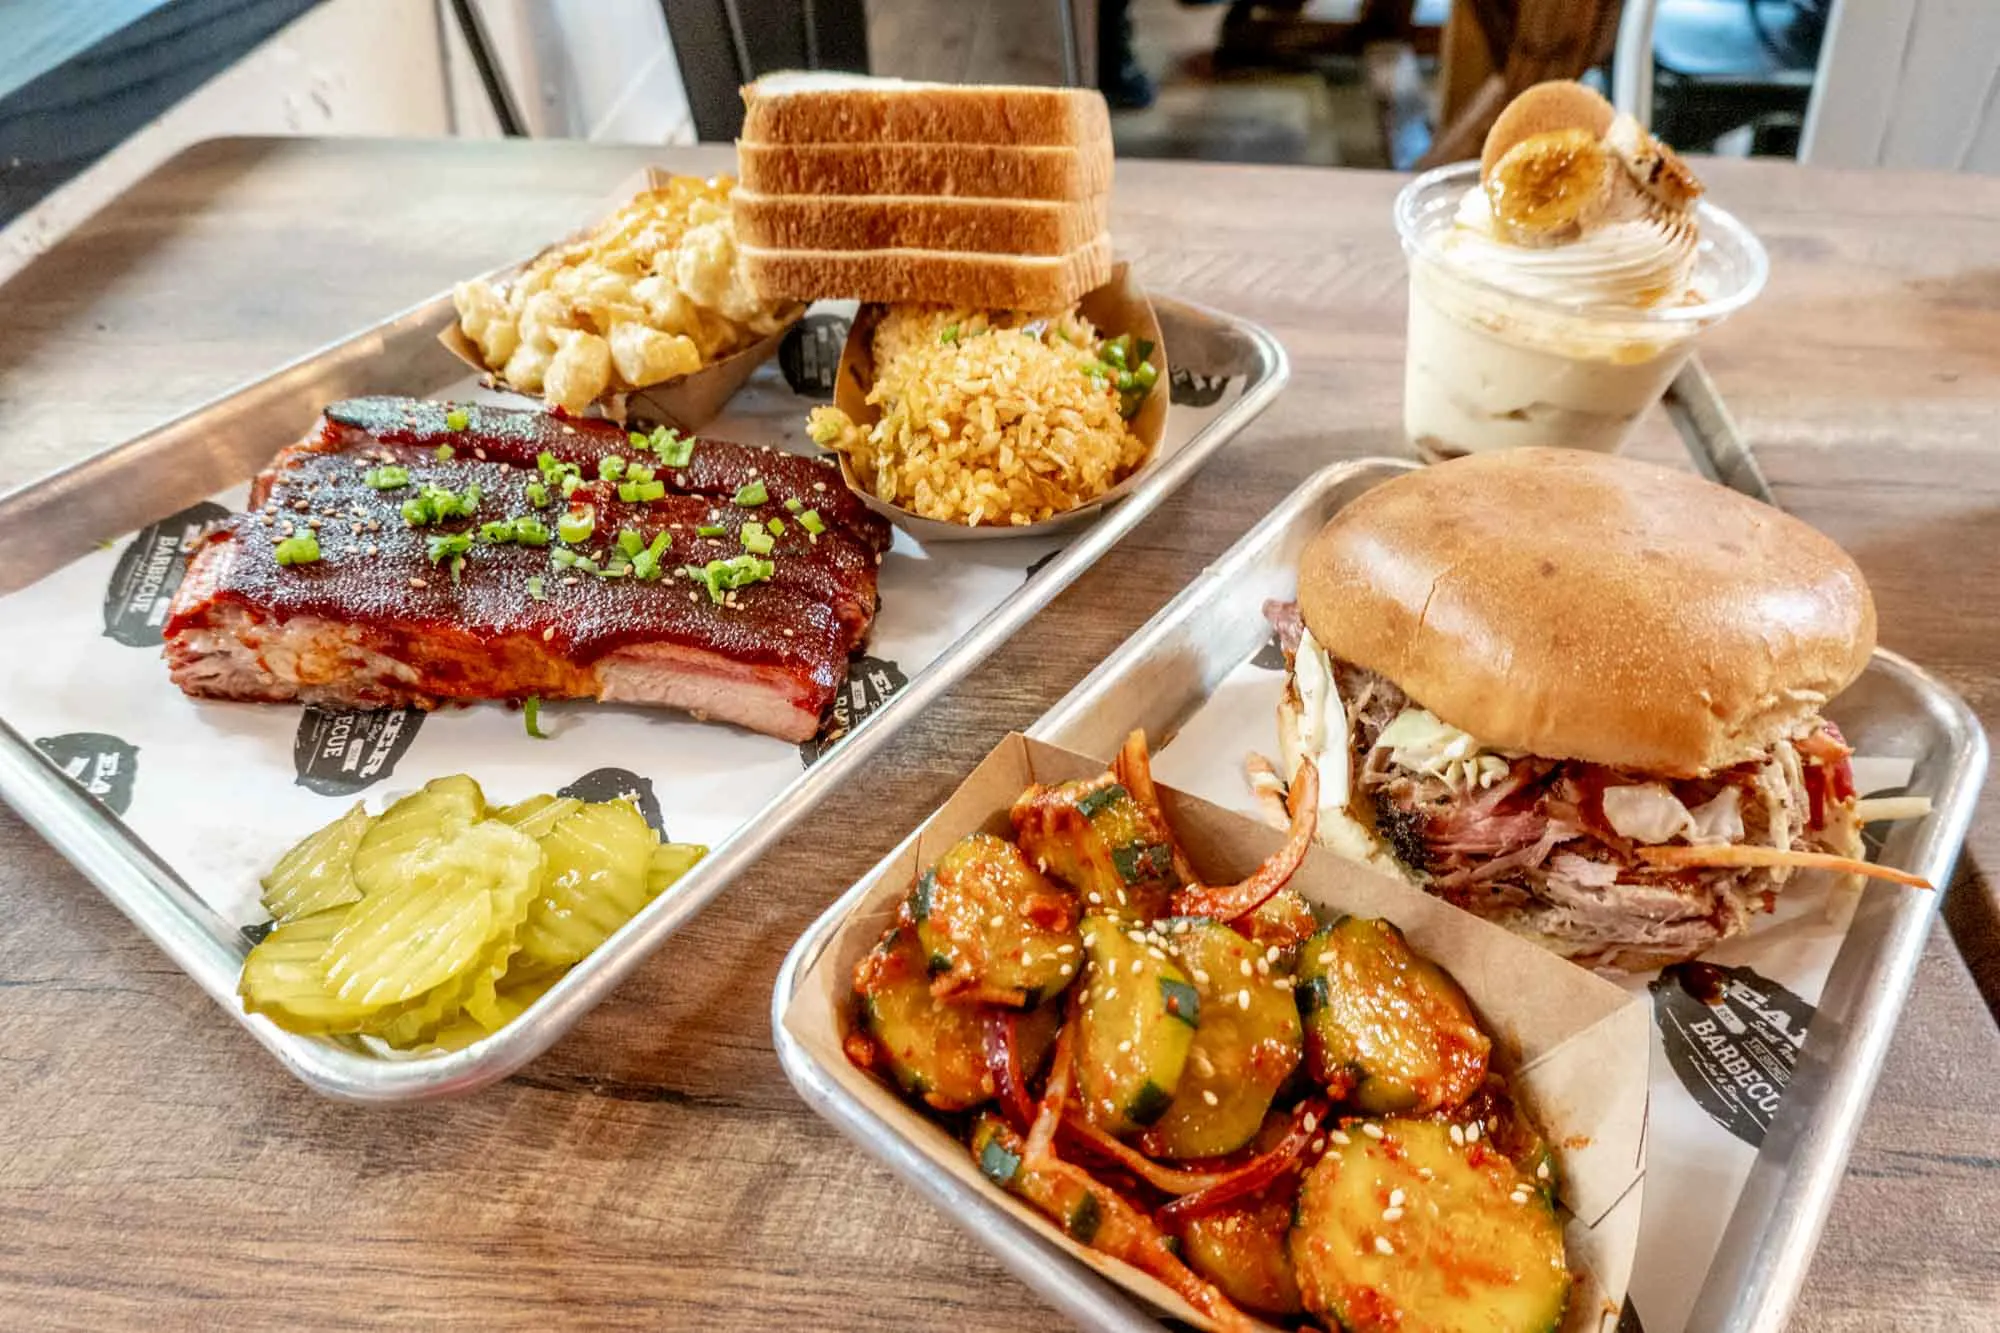 Ribs, pulled pork sandwich, pickles, and other food on table.